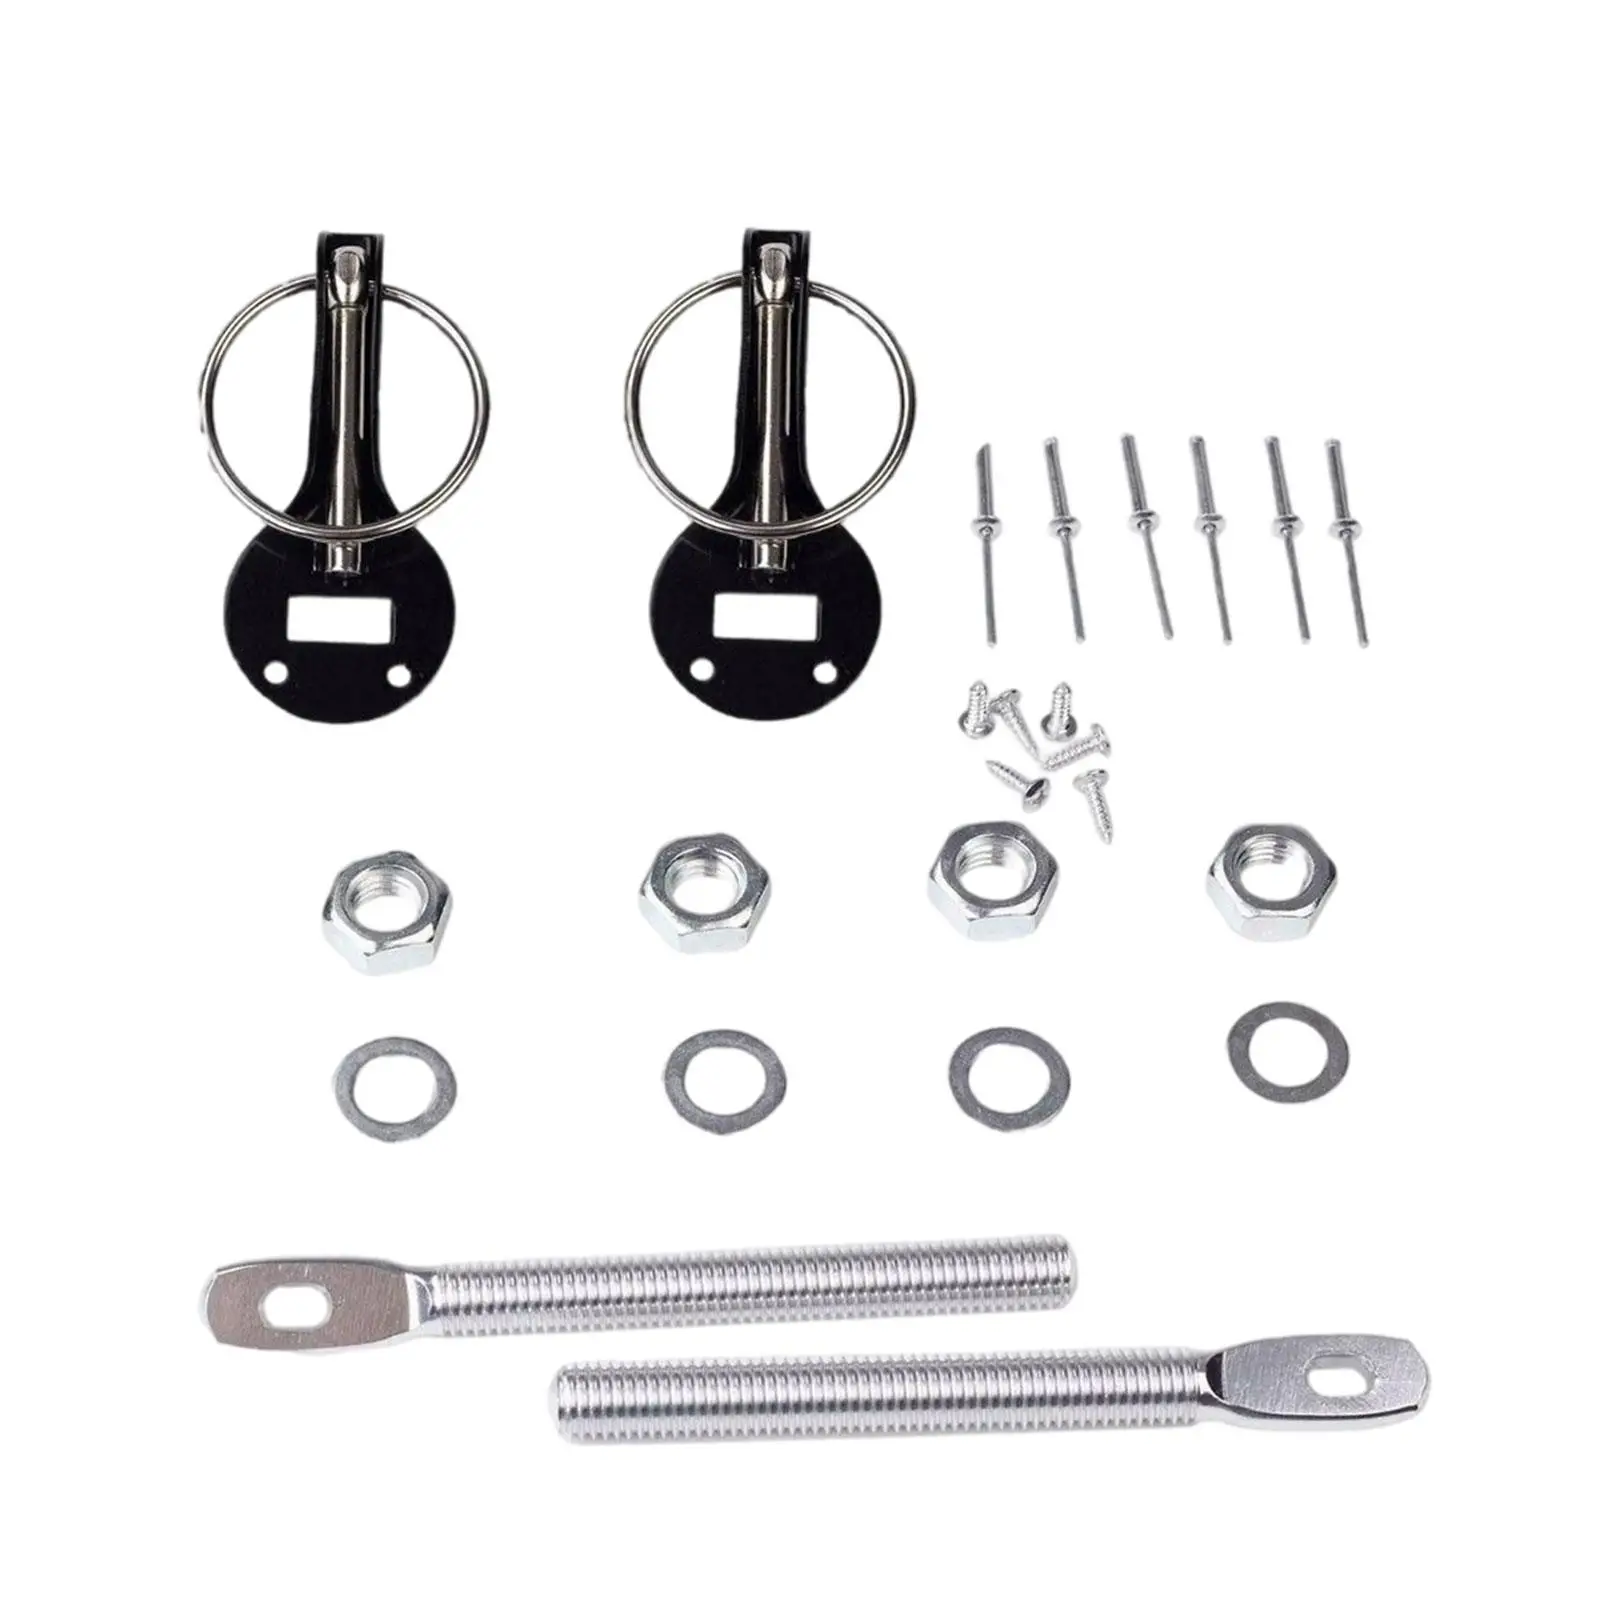 Hood  Cylindrical  Accessories Bonnet Safety Pins for  Car